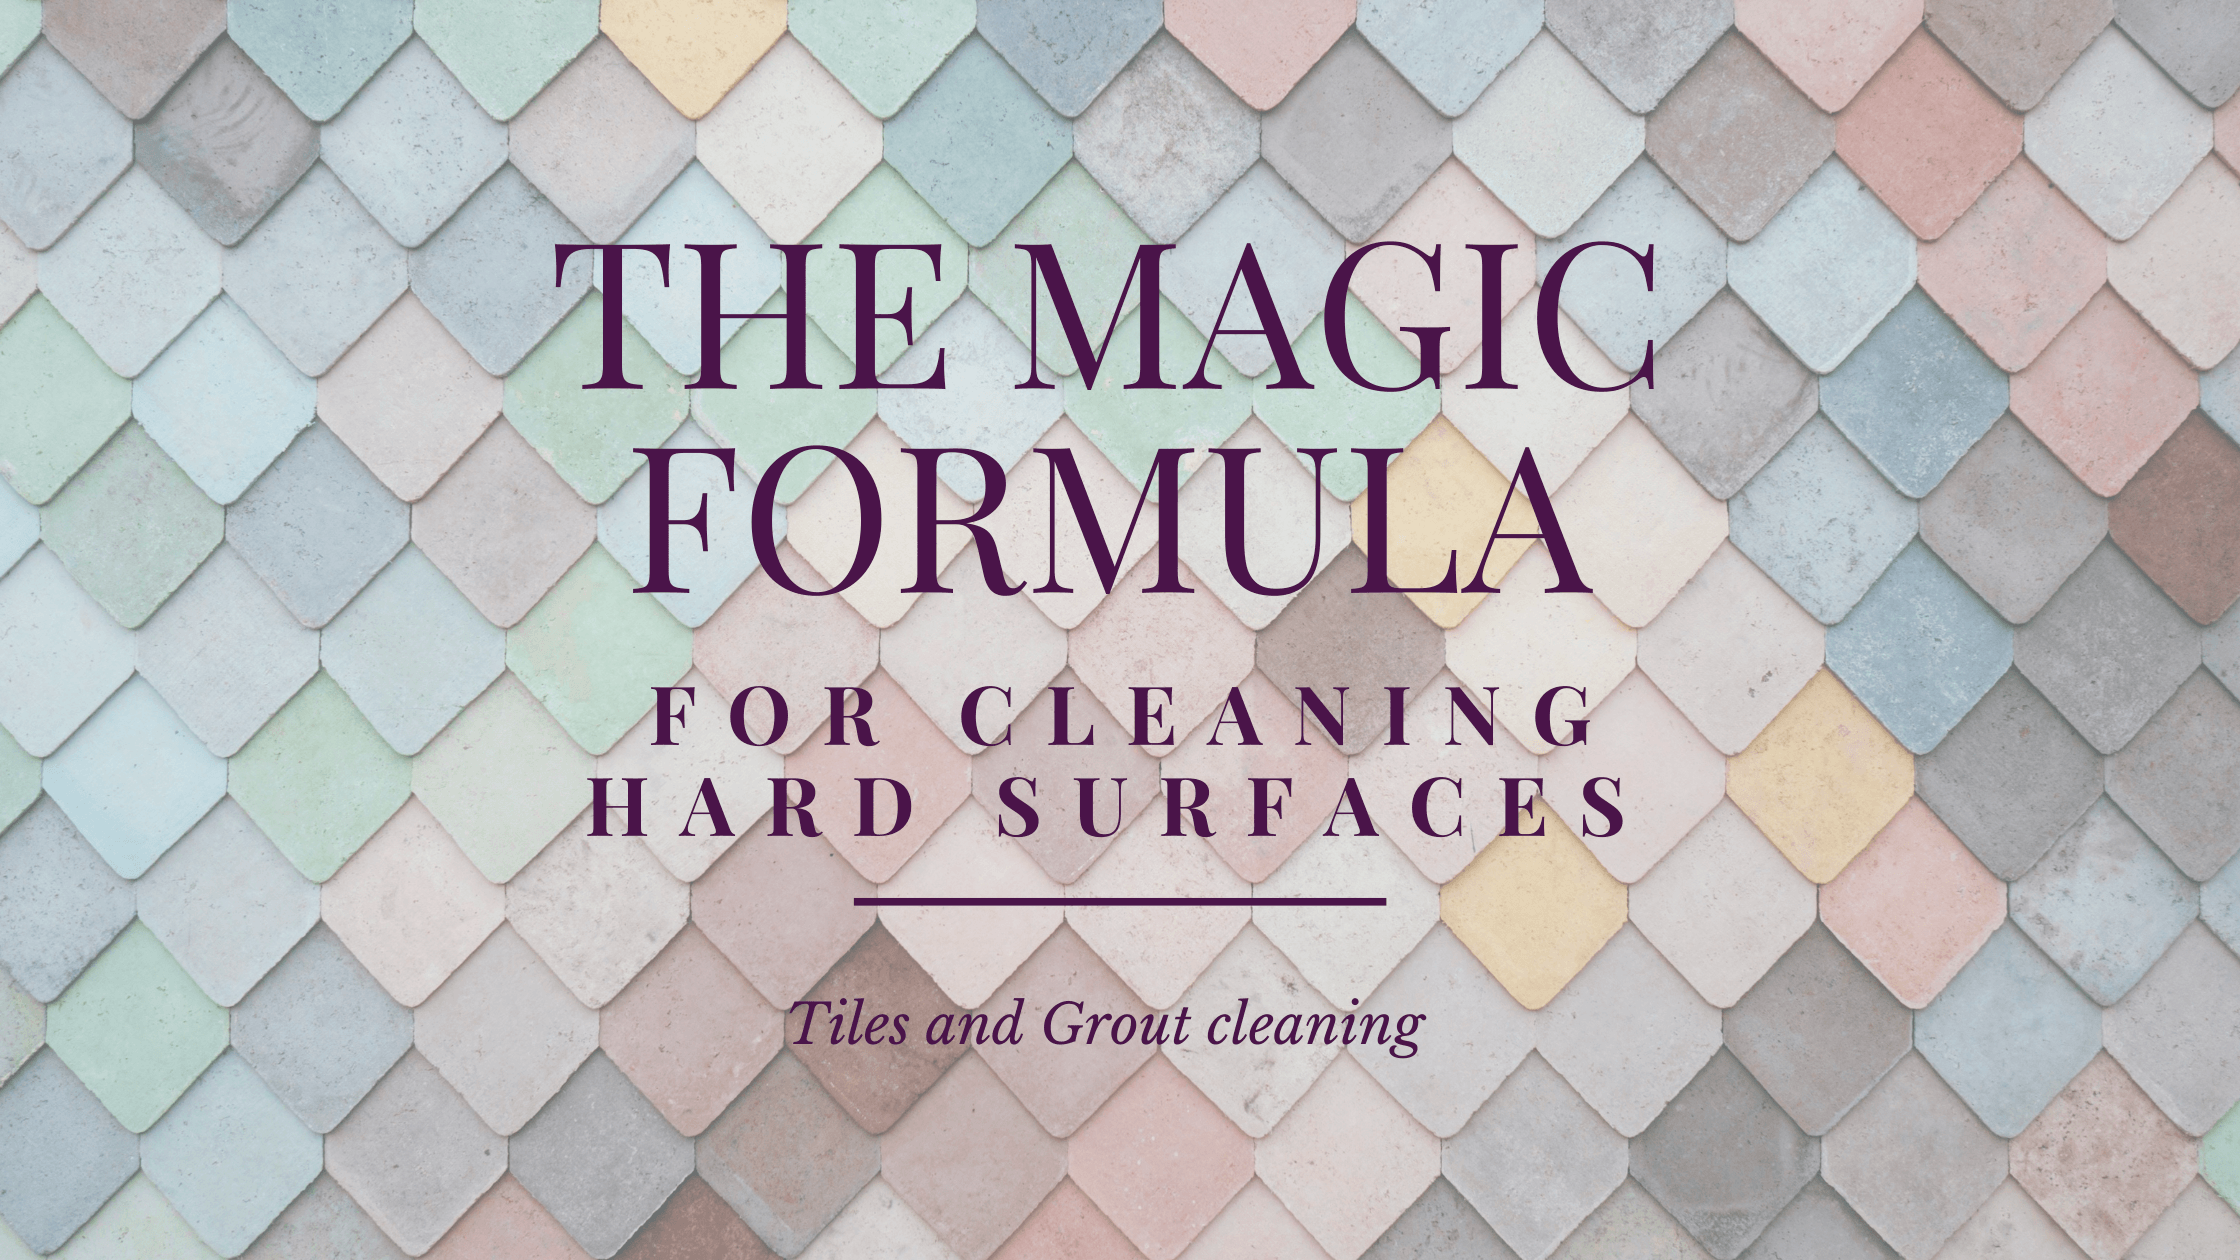 The Magic Formula for Cleaning Hard Surfaces - Tile and Grout Cleaning 10